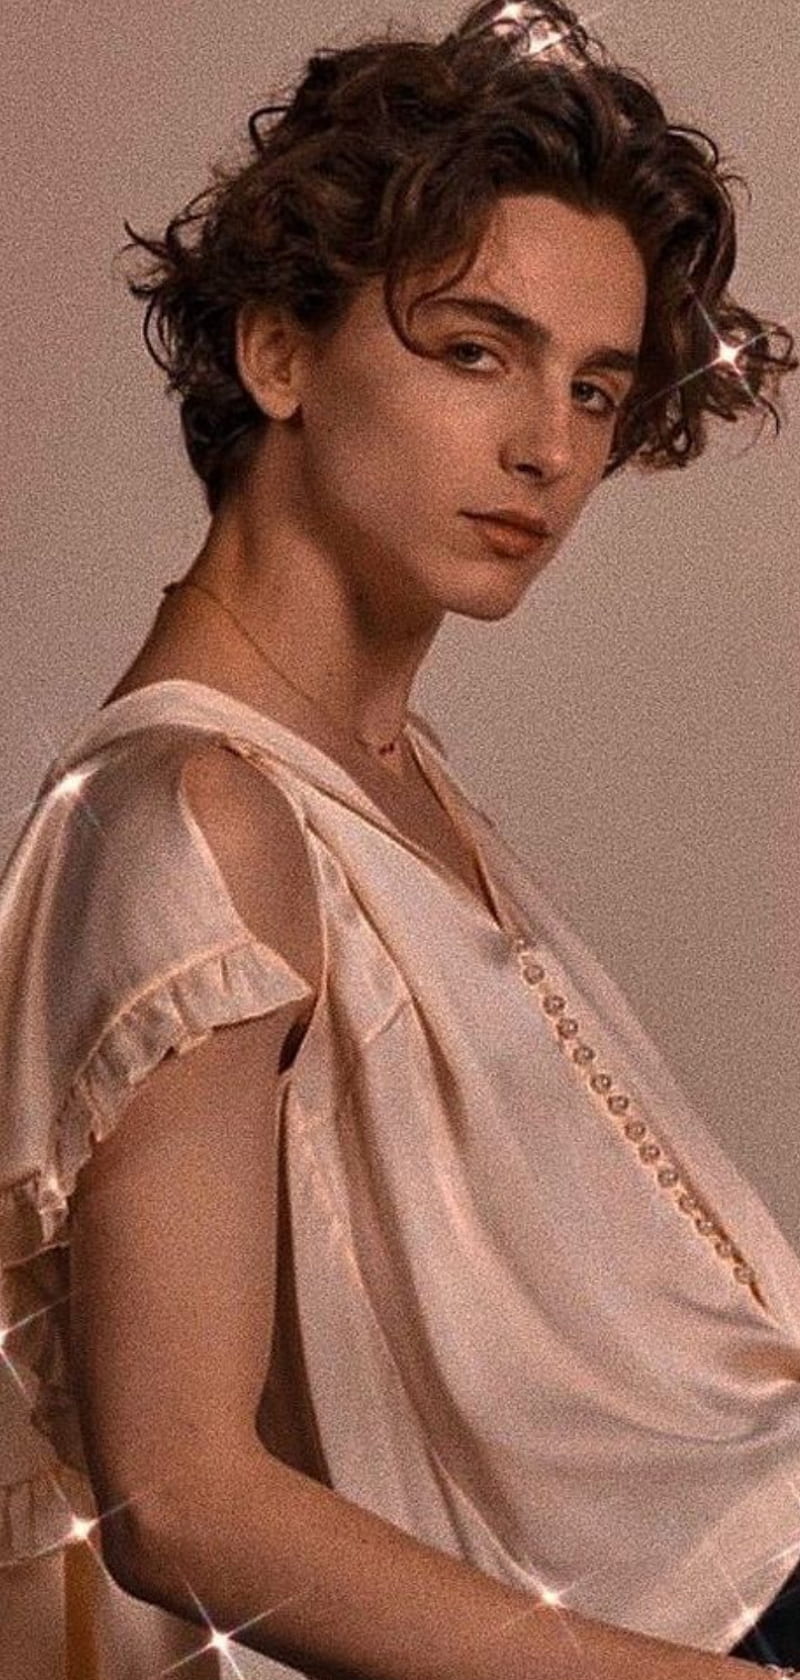 Timothee Chalamet, call me by your name, HD phone wallpaper